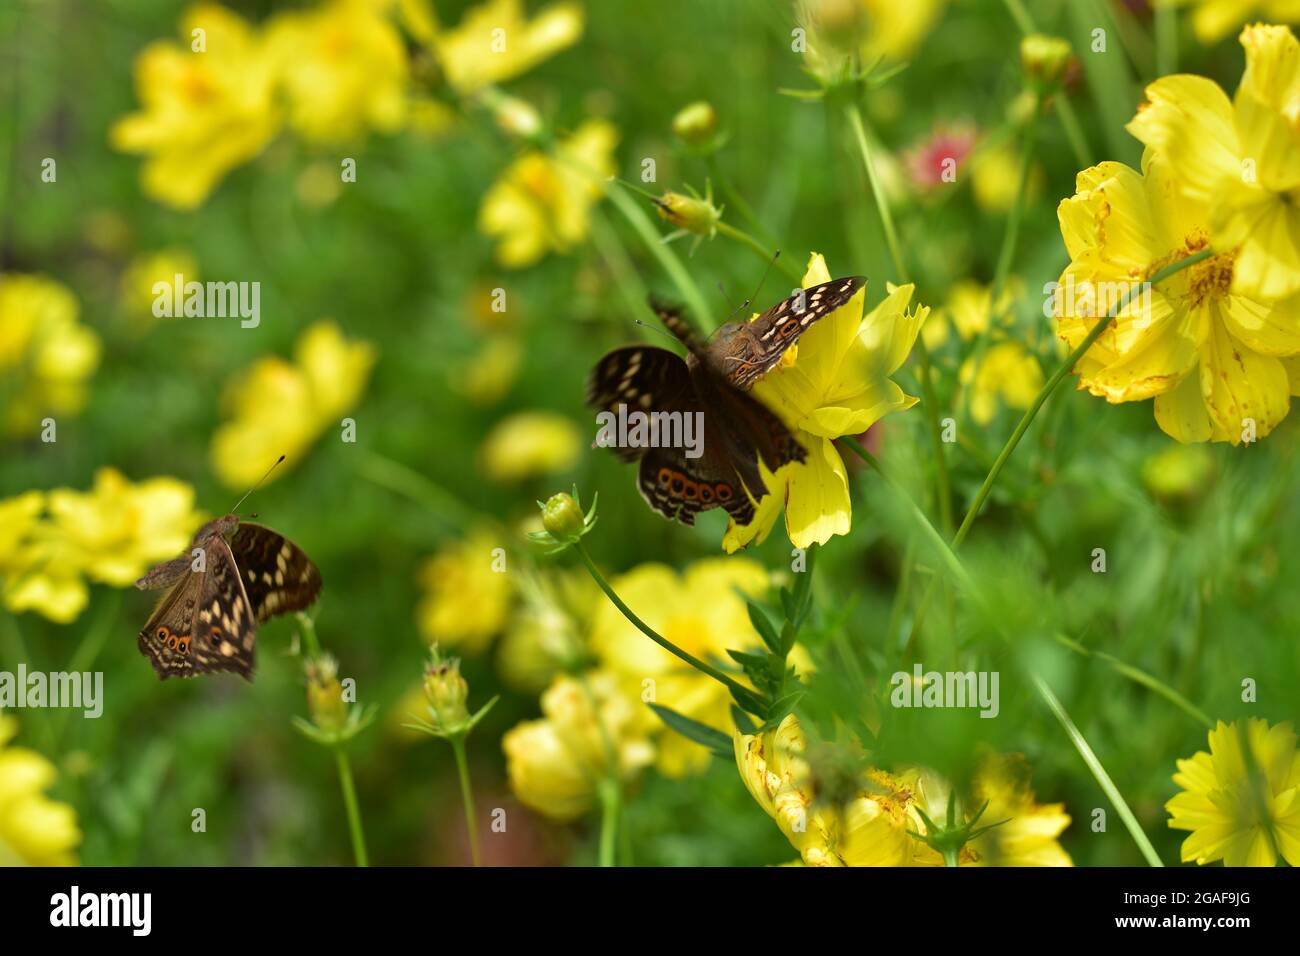 Painted jezebel Butterfly on a flower Stock Photo